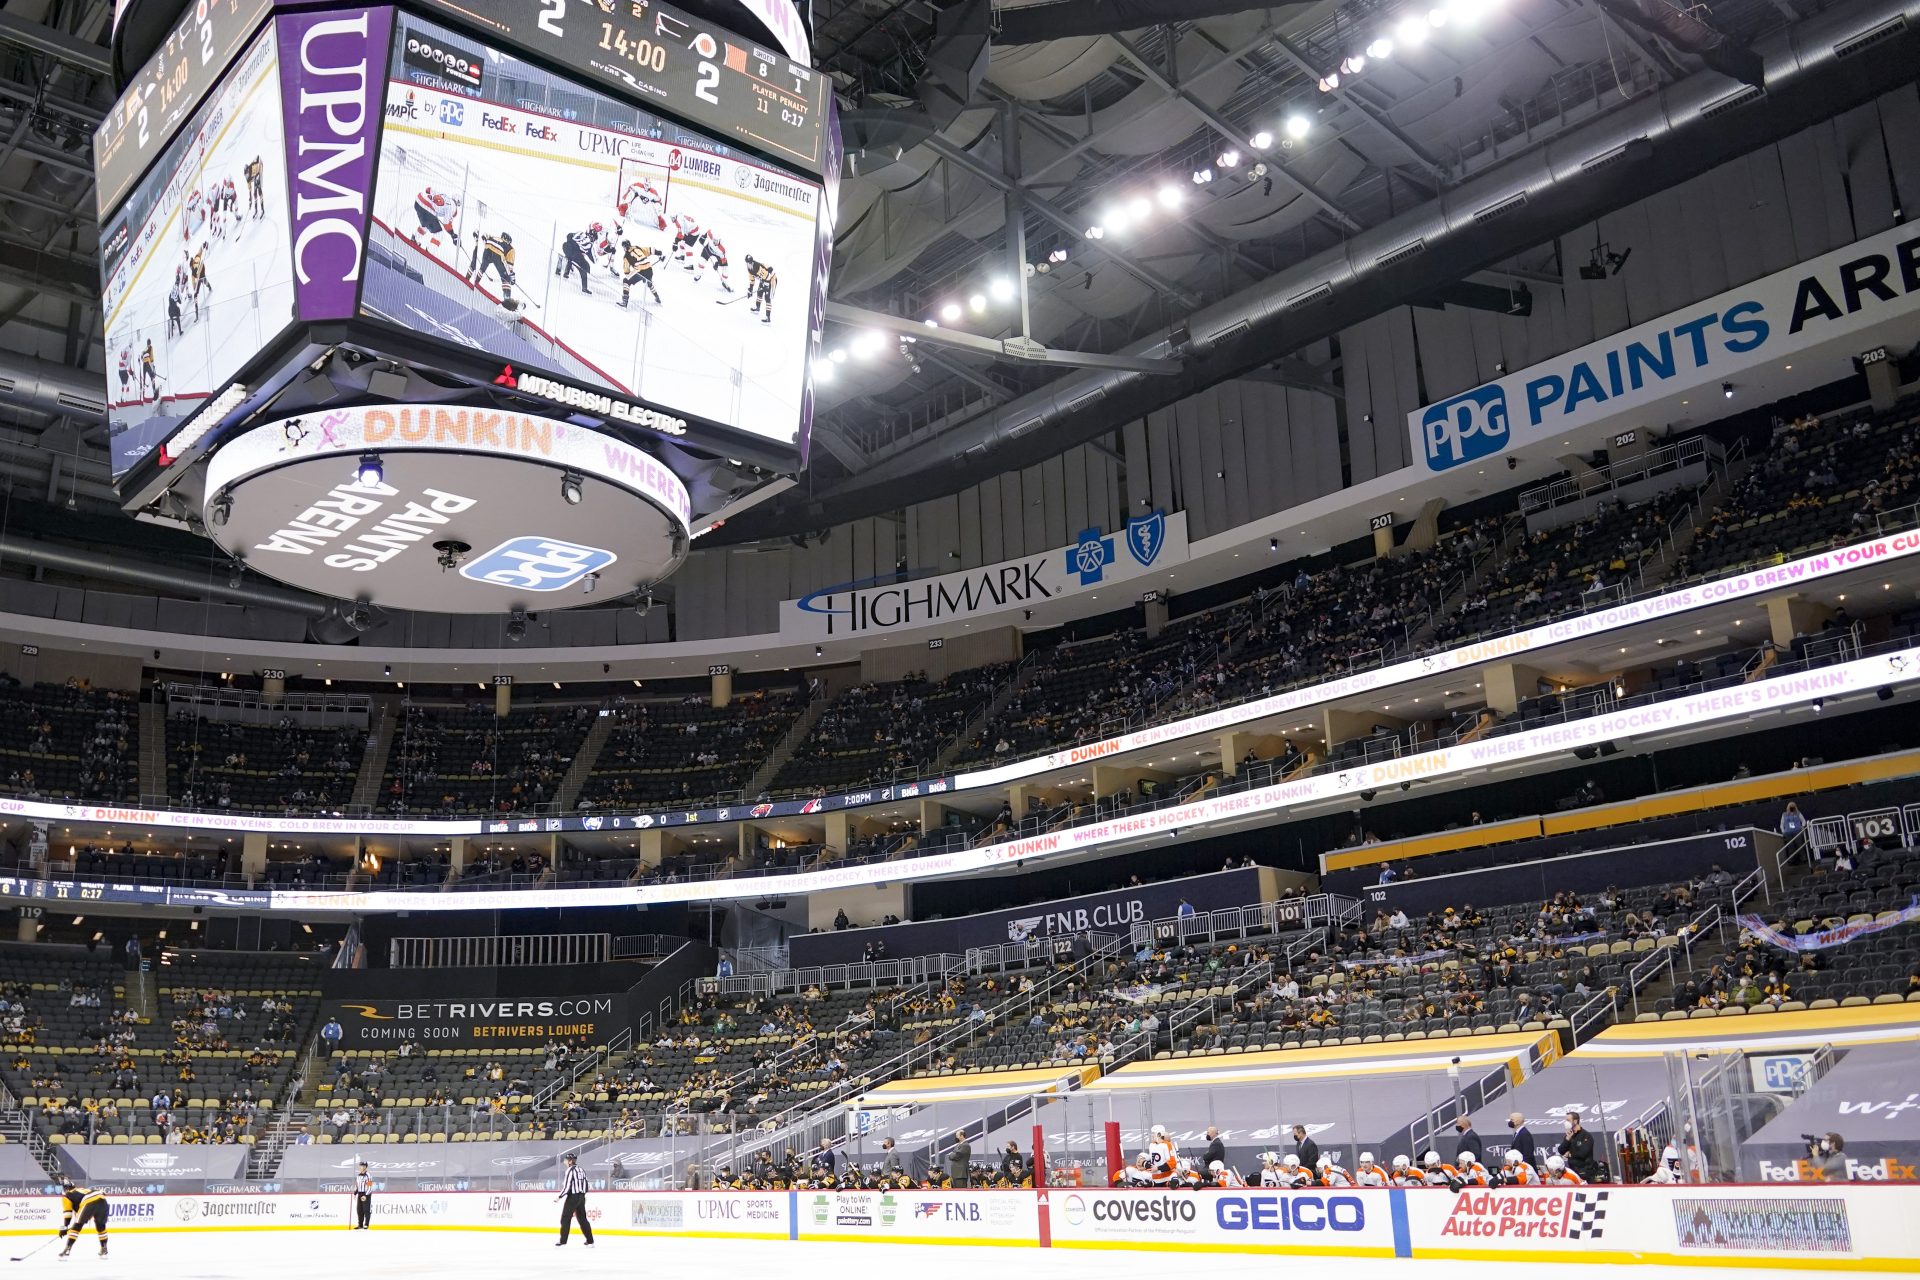 The teams preparing for a face-off are displayed on the video screen on the scoreboard at PPG Paints Arena during the second period of an NHL hockey game between the Pittsburgh Penguins and the Philadelphia Flyers, Saturday, March 6, 2021, in Pittsburgh.